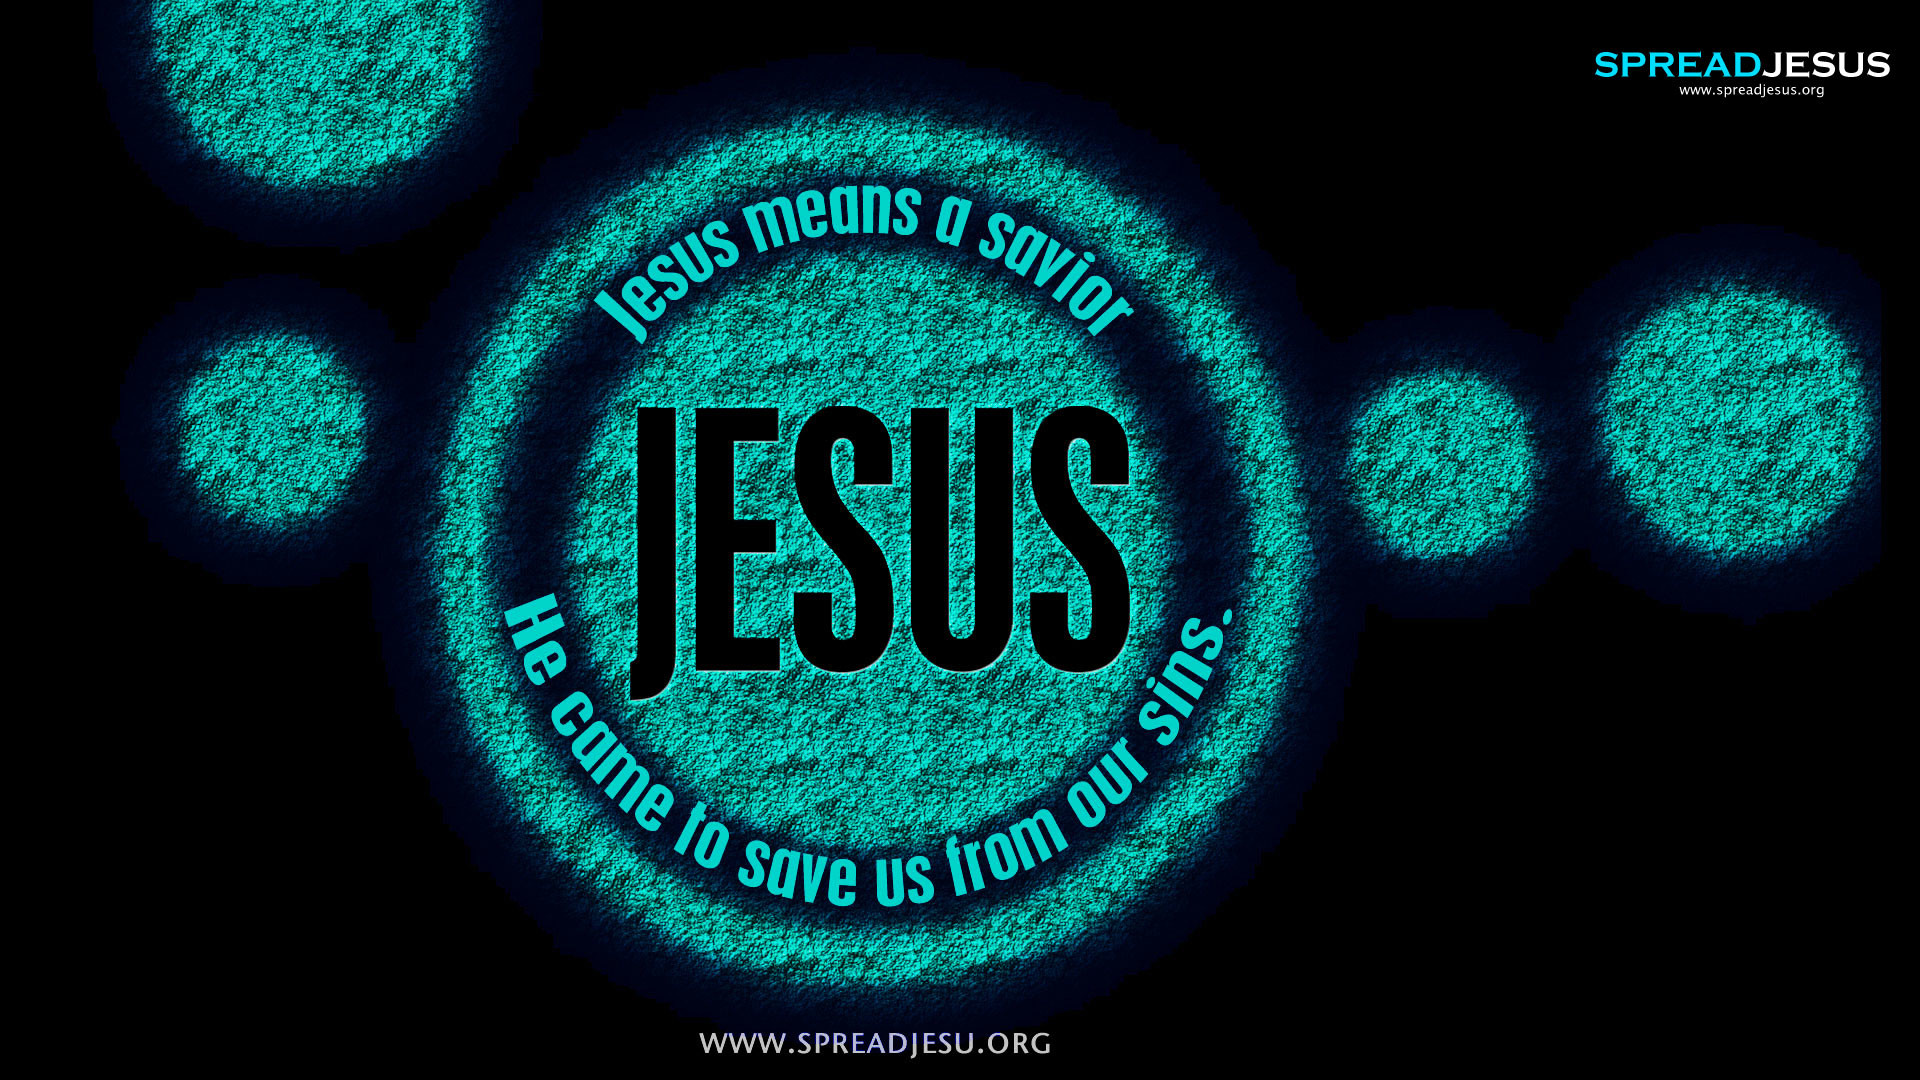 1920x1080 Jesus Means A Savior HD wallpapers free downloading Jesus Means A Savior He  came to Save